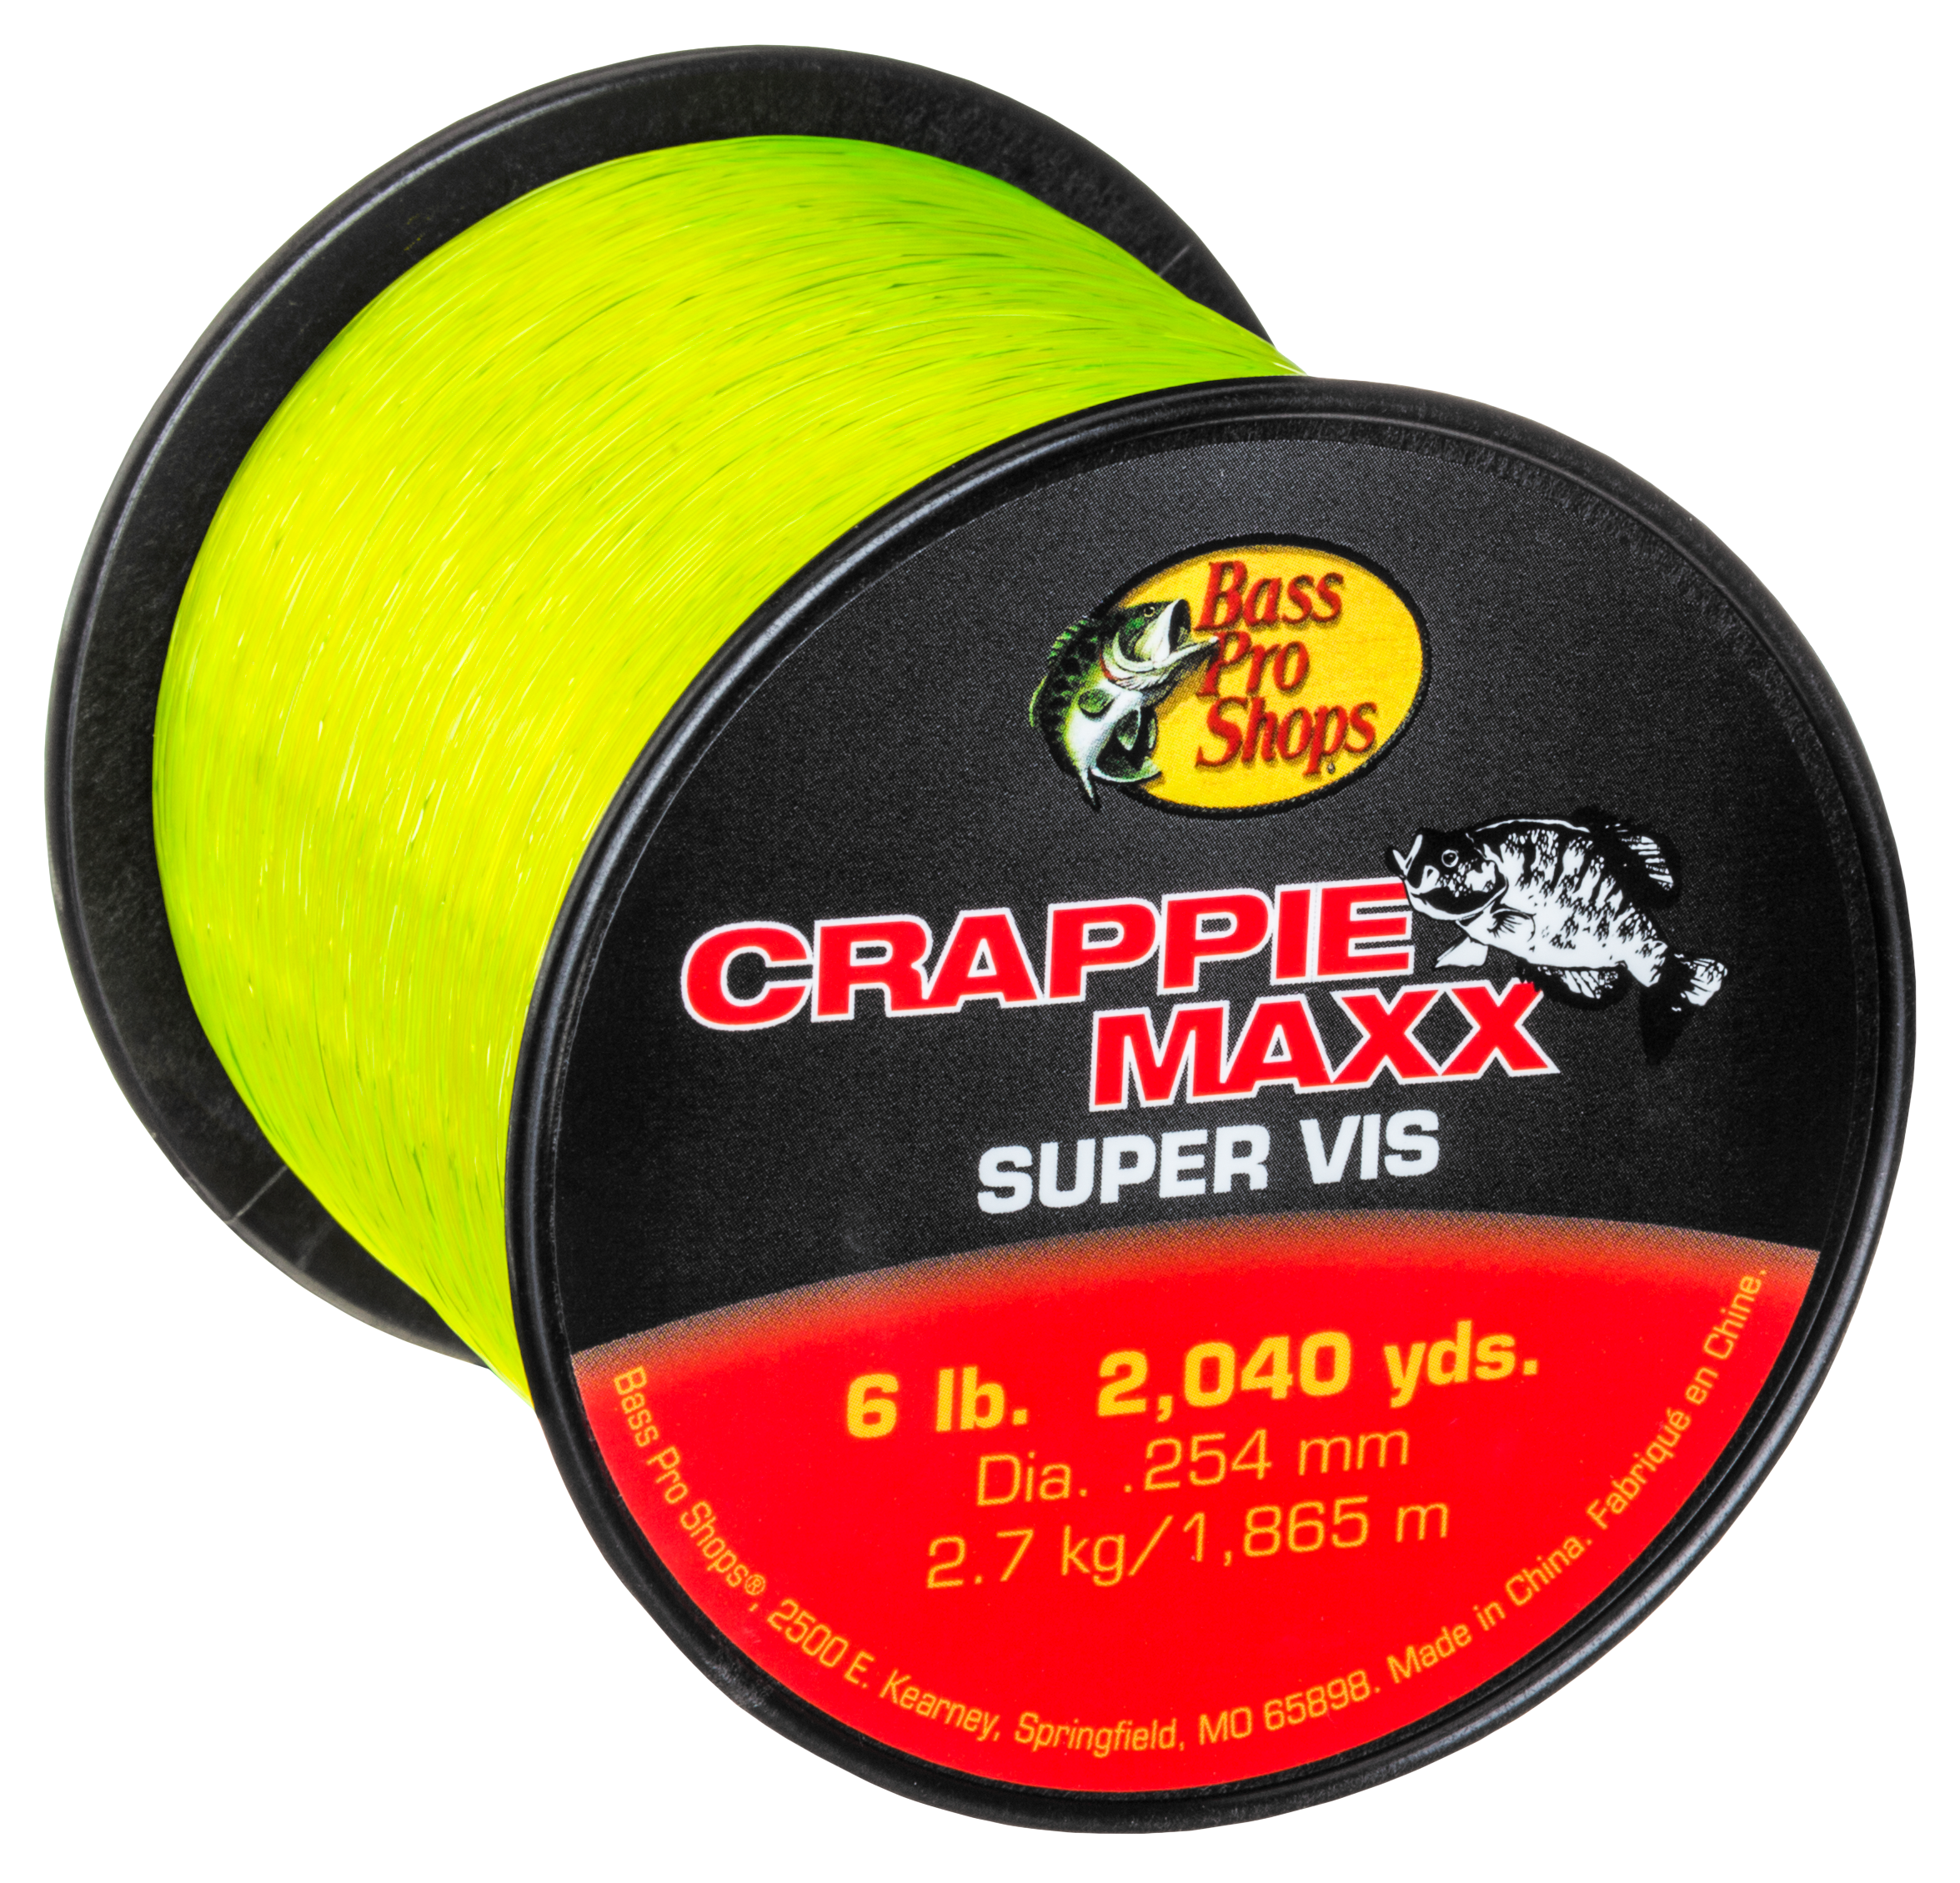 Crappie fishing line offers superior qualities